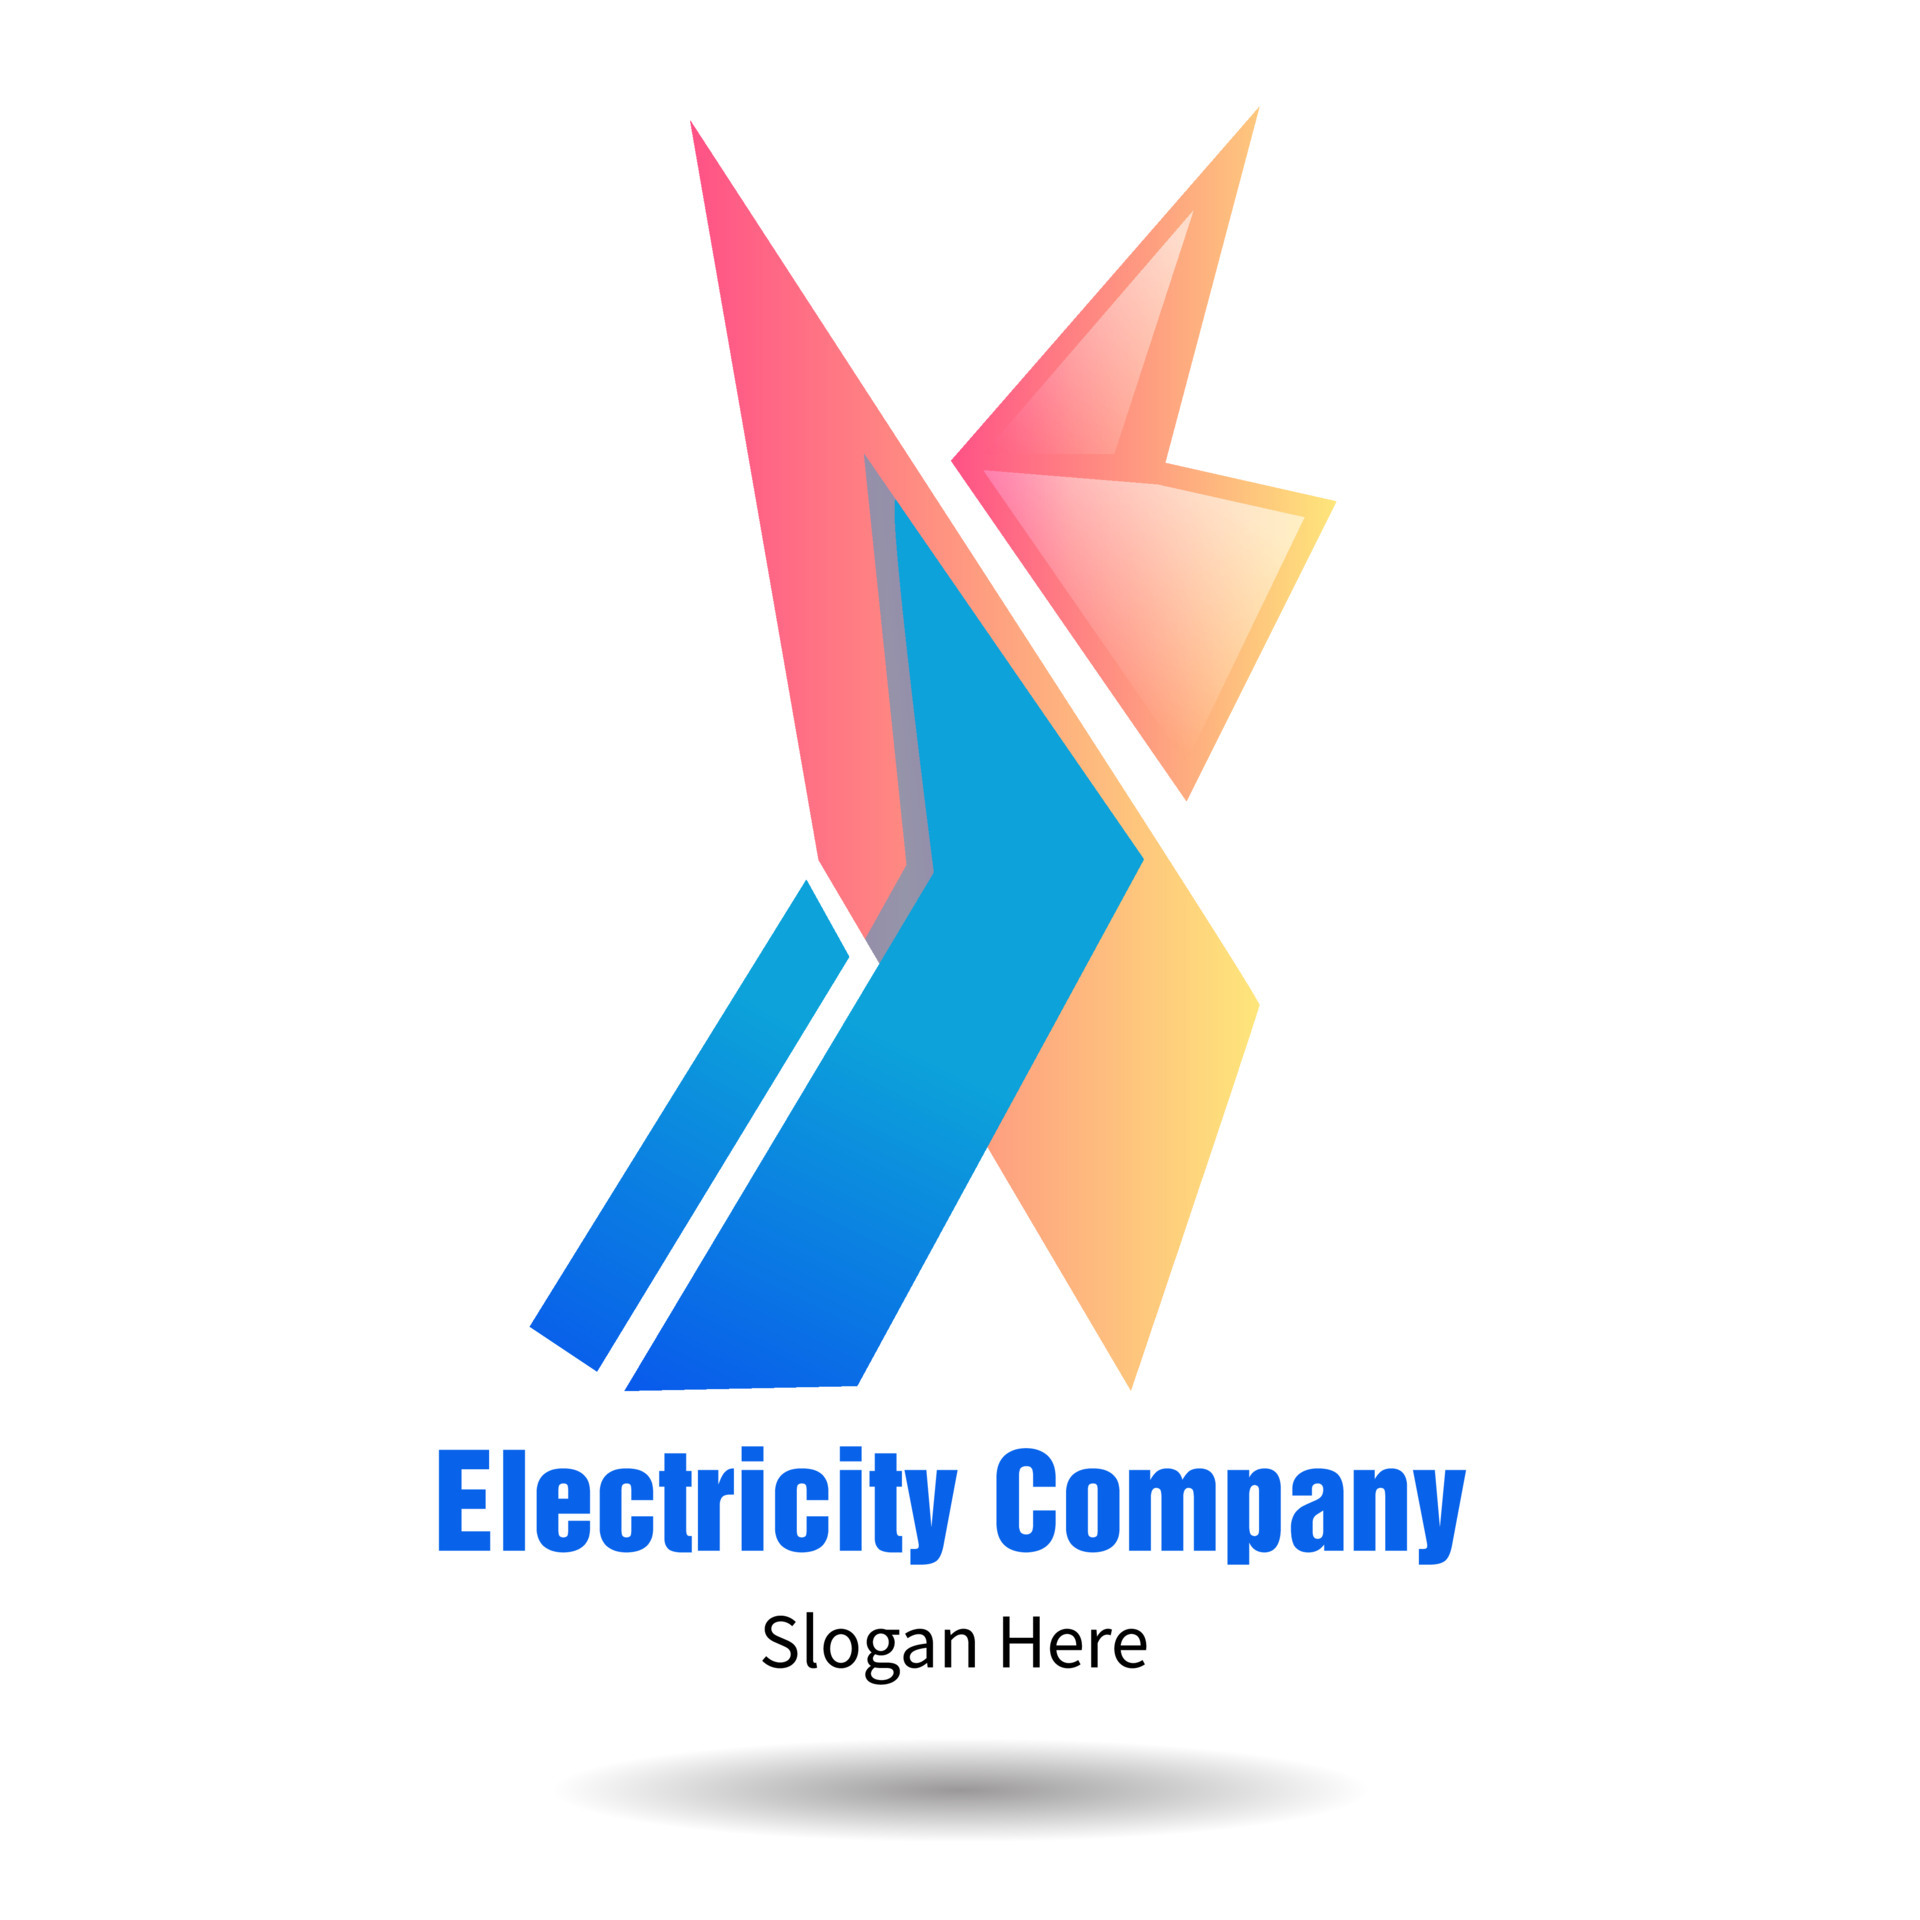 electricity-company-logo-for-sign-business-5379880-vector-art-at-vecteezy